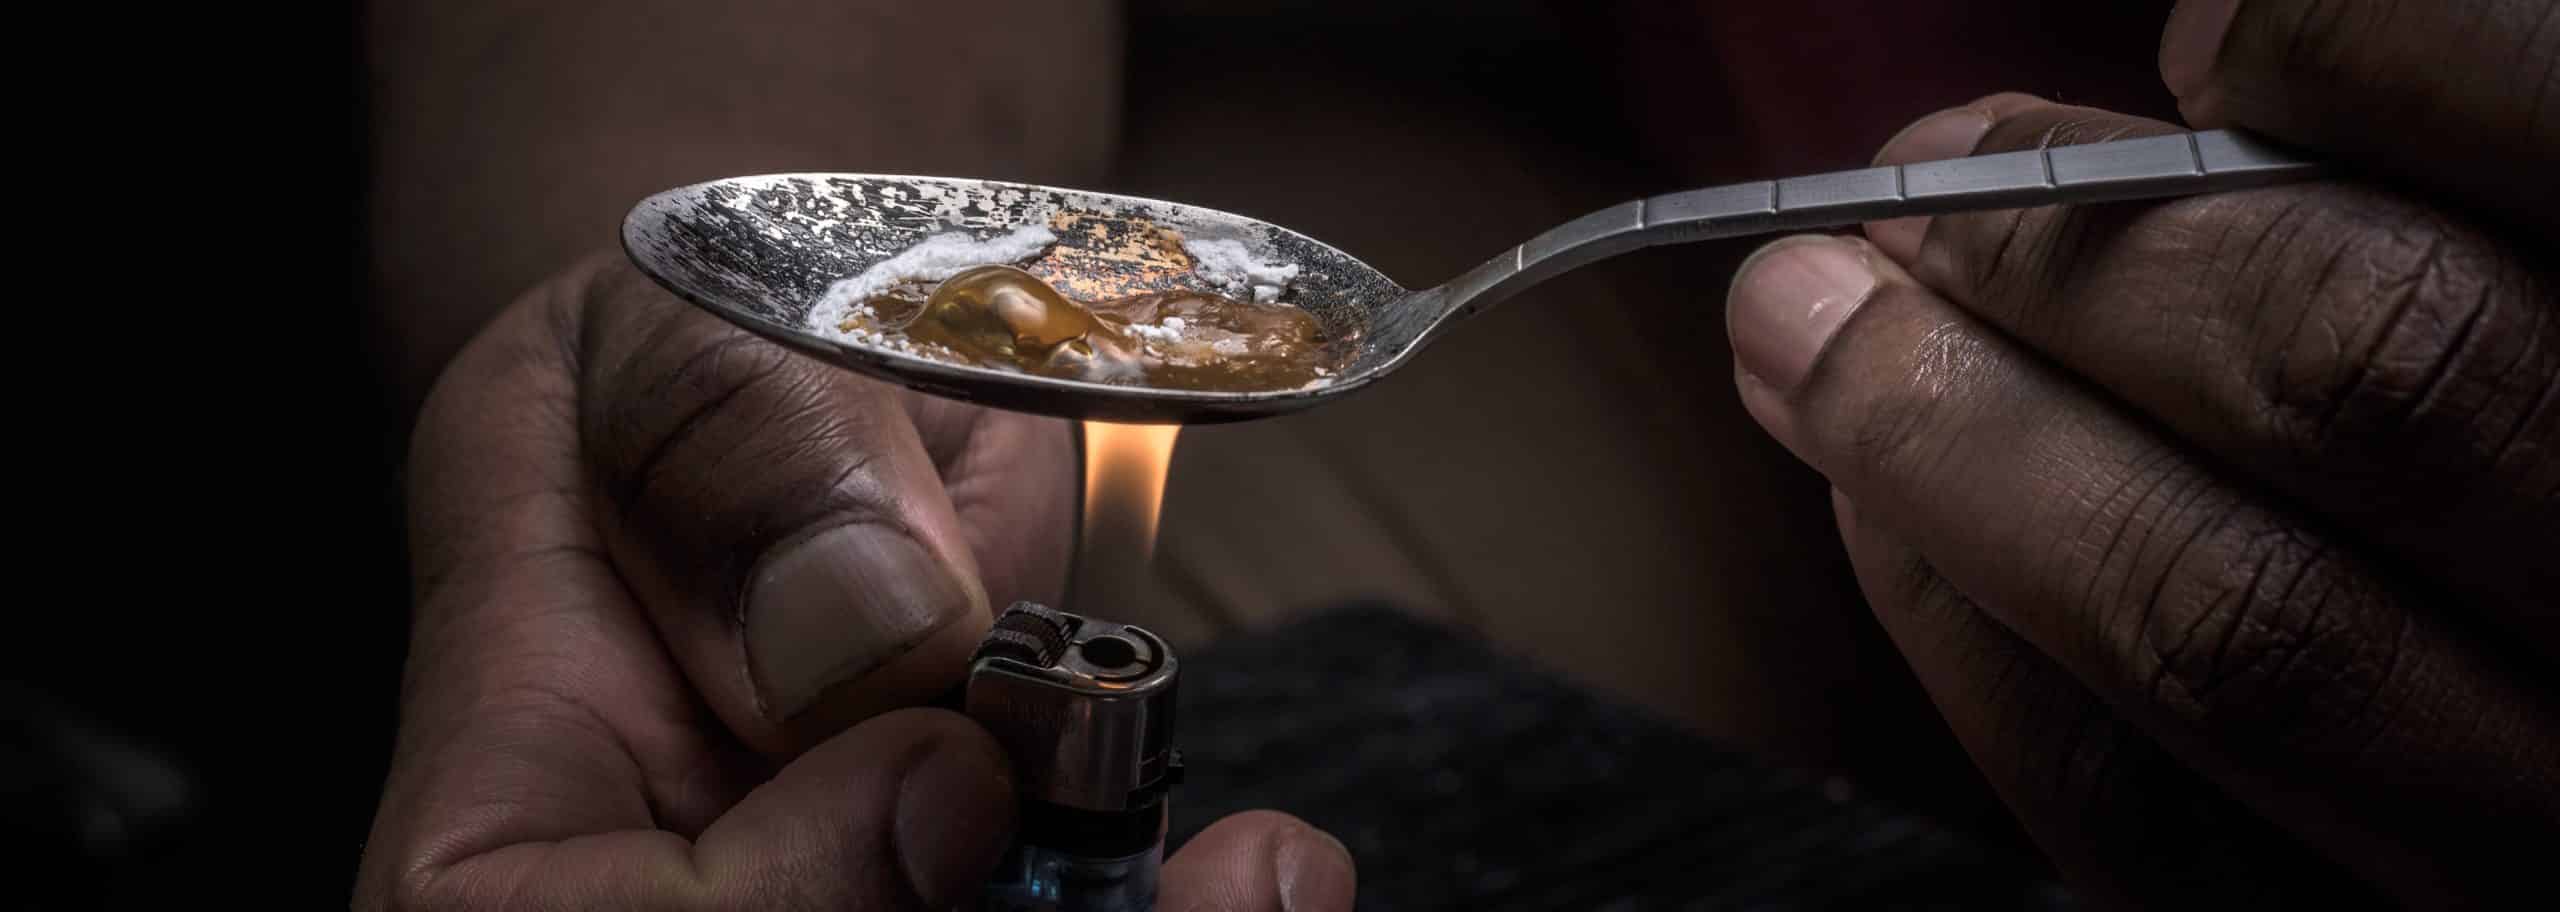 What heroin and the paraphernalia looks like